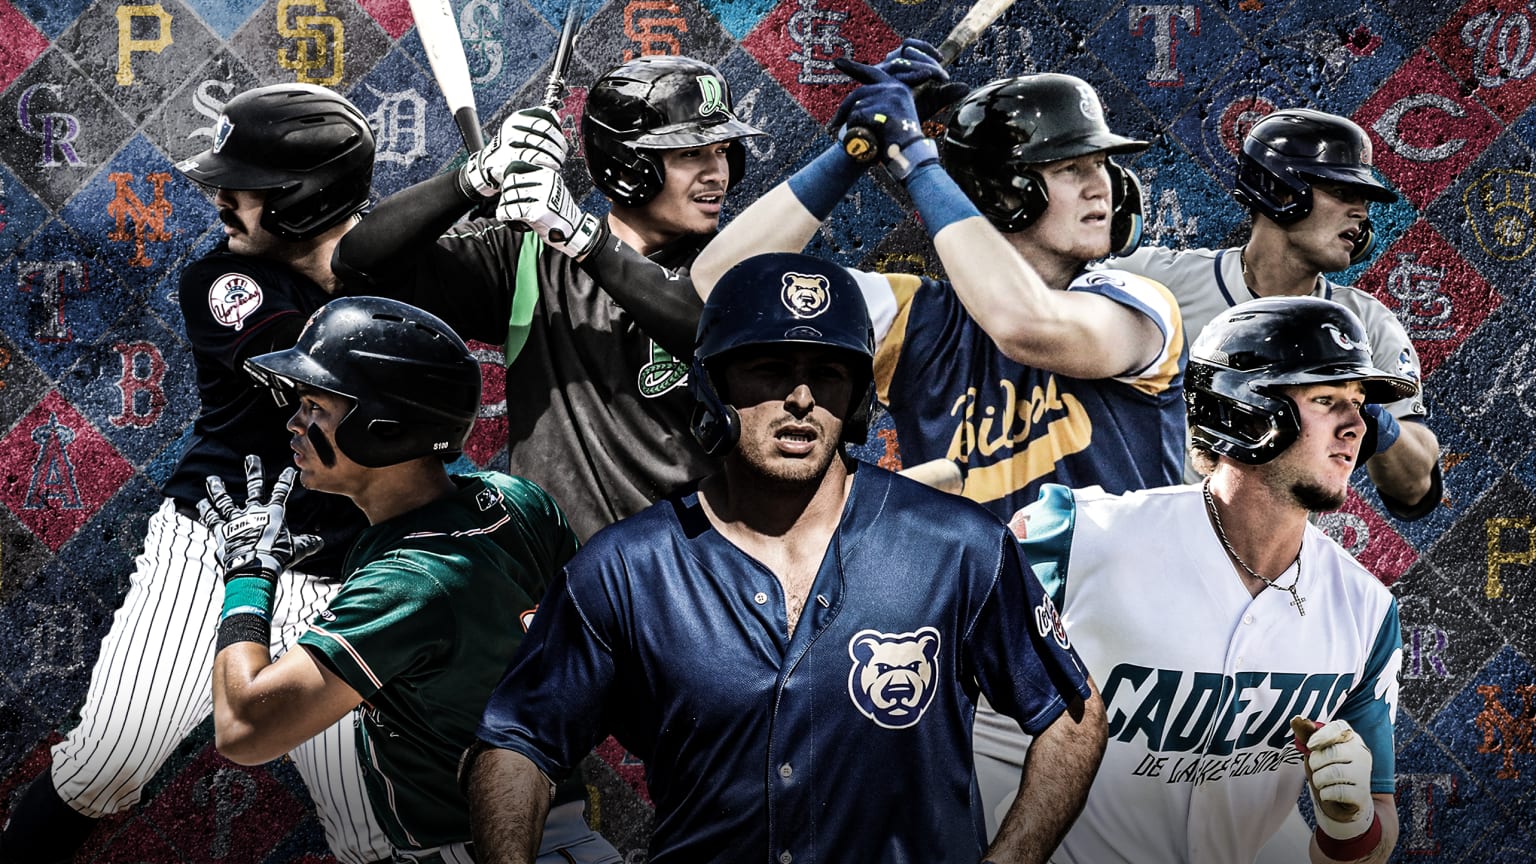 A composite image of 7 prospects against a background of team logos